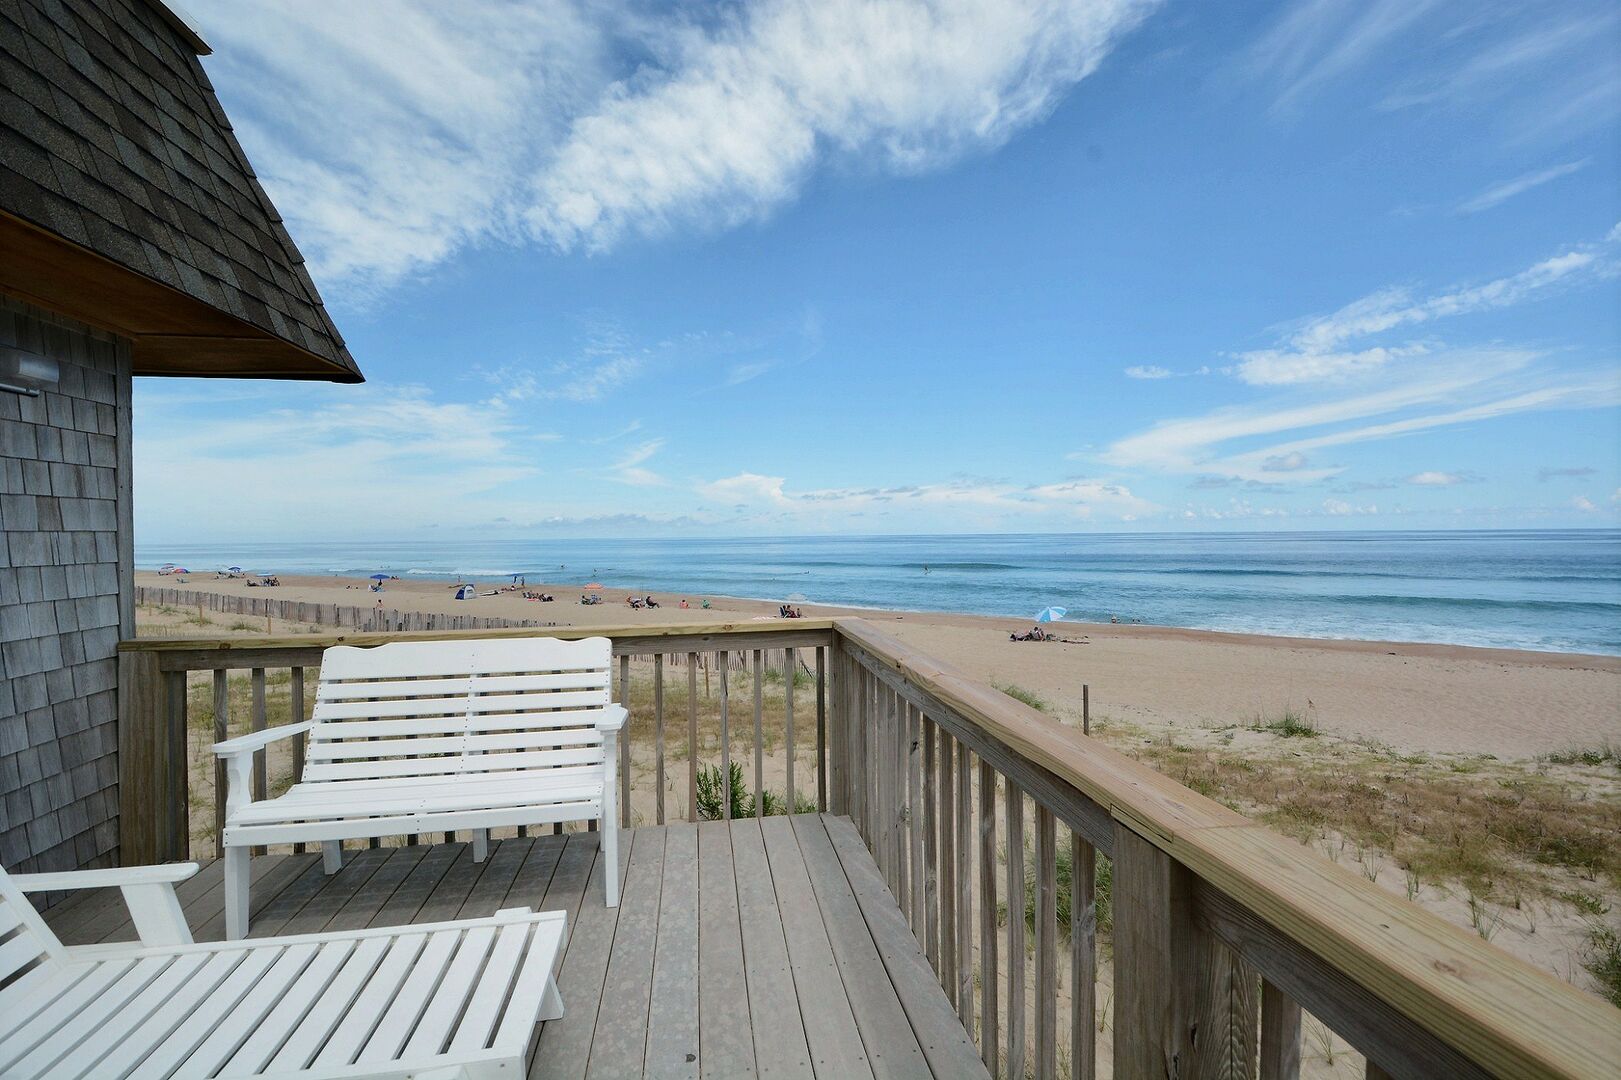 Views form the patio of one of our Hatteras summer rentals